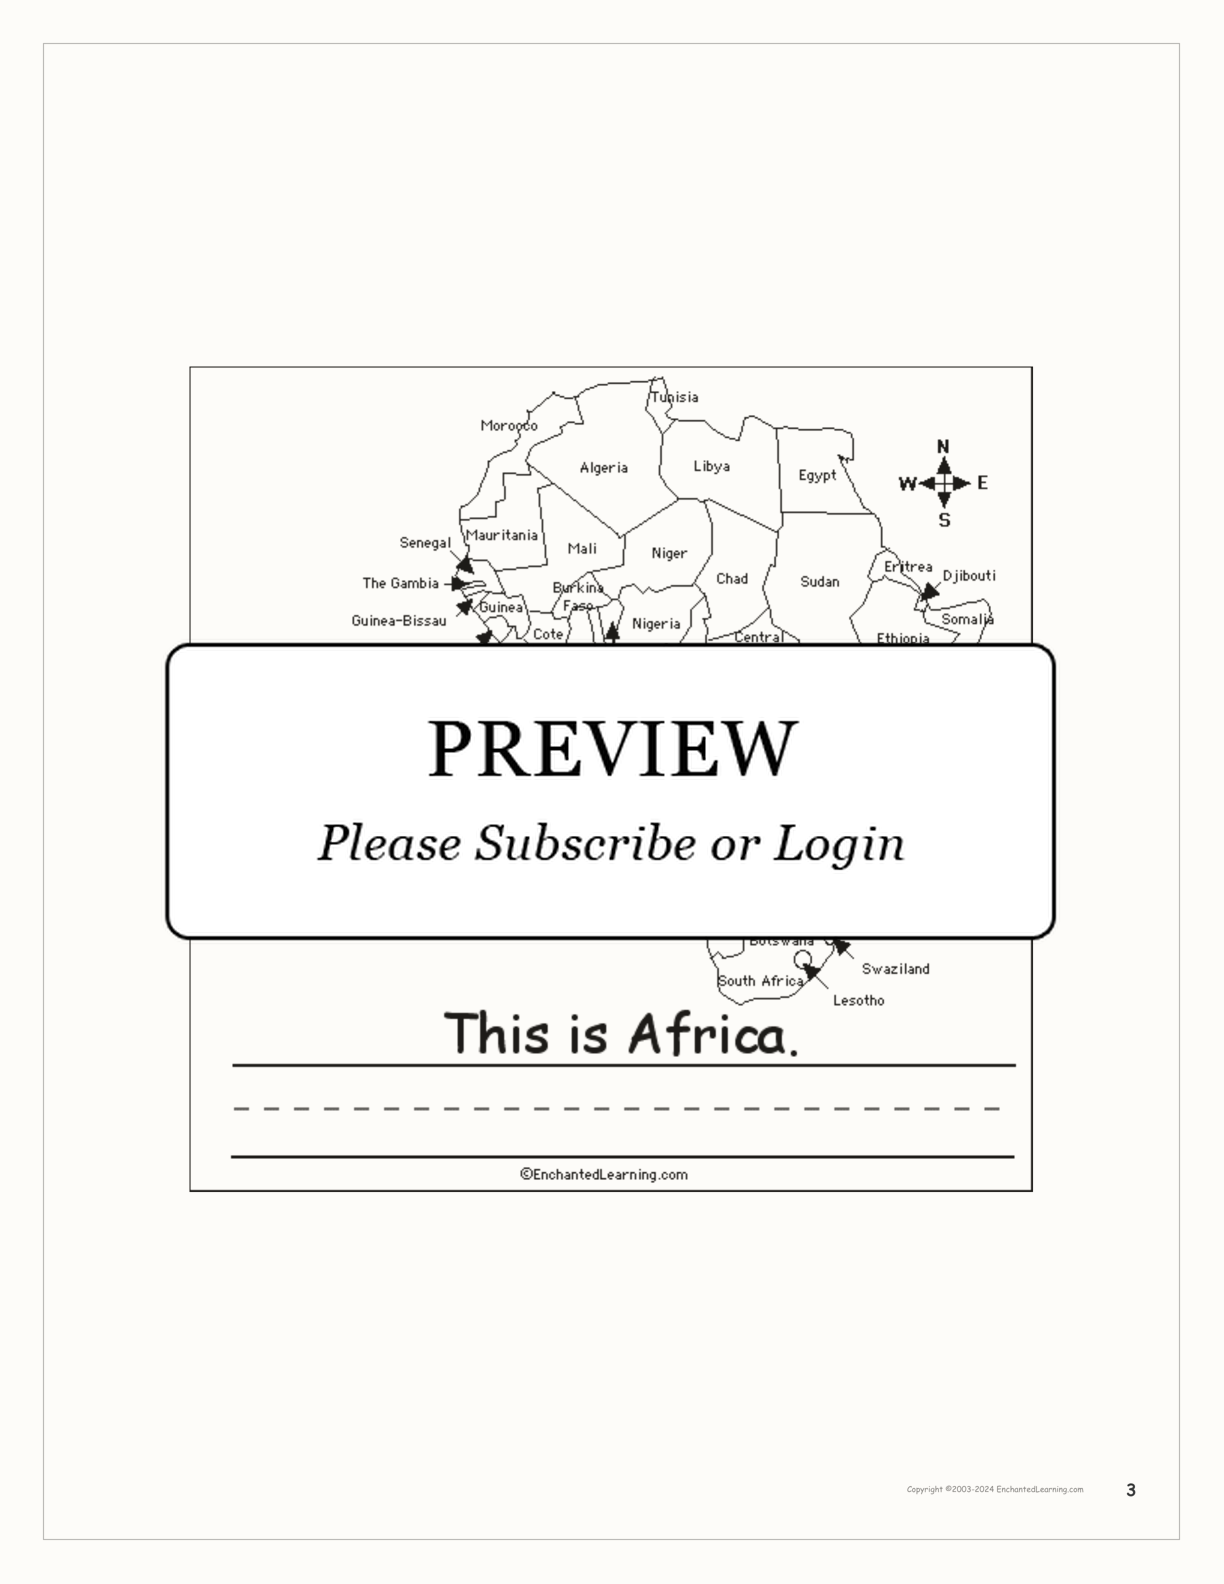 The Seven Continents Book interactive printout page 3